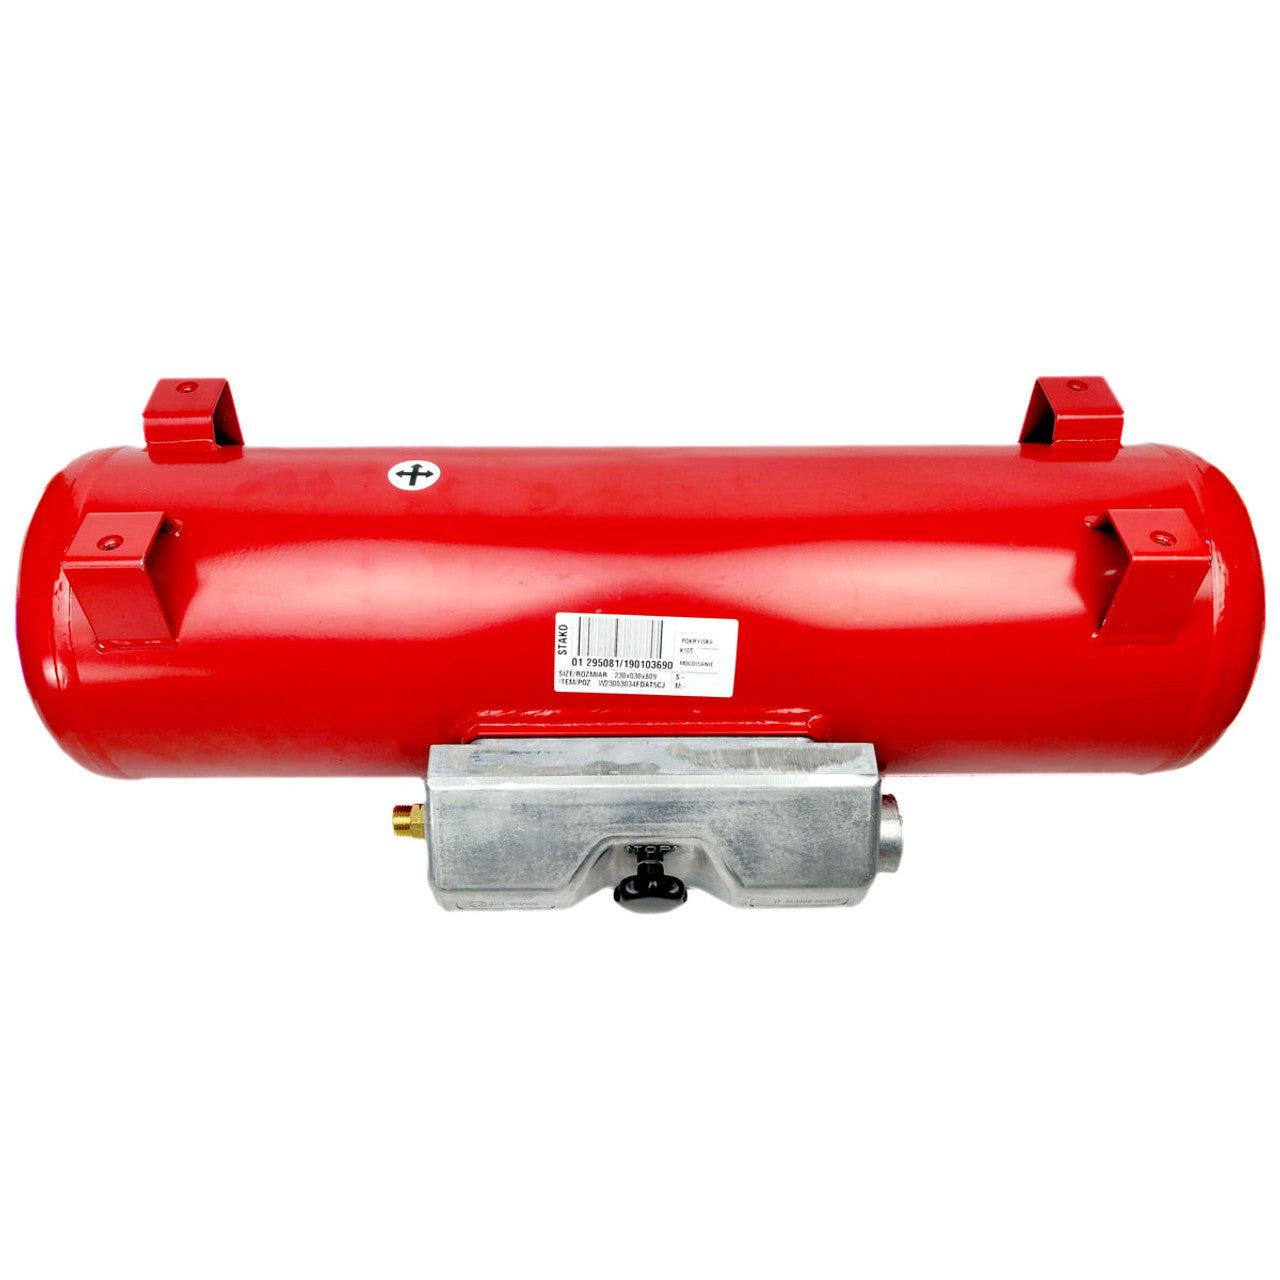 70 Litres Motorhome Gas Tank Only with Feet - 315mm by 1004mm with set of valves and box - 400091